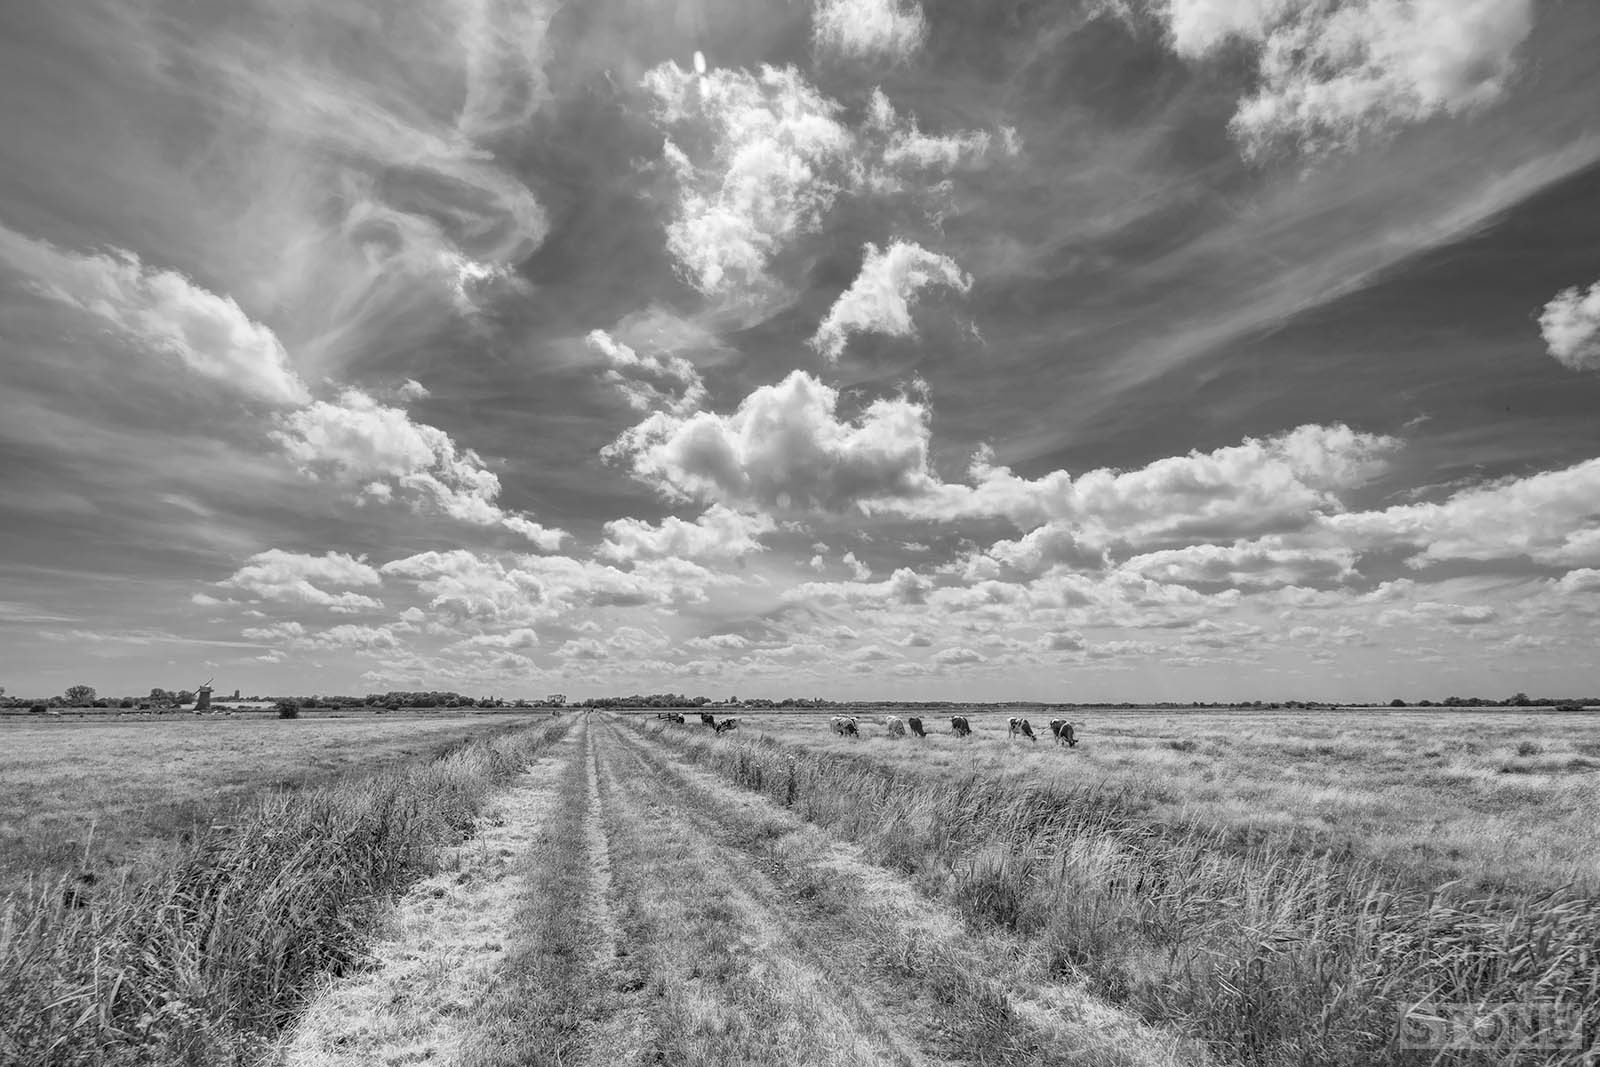 Lost in a Landscape: Heigham Holmes